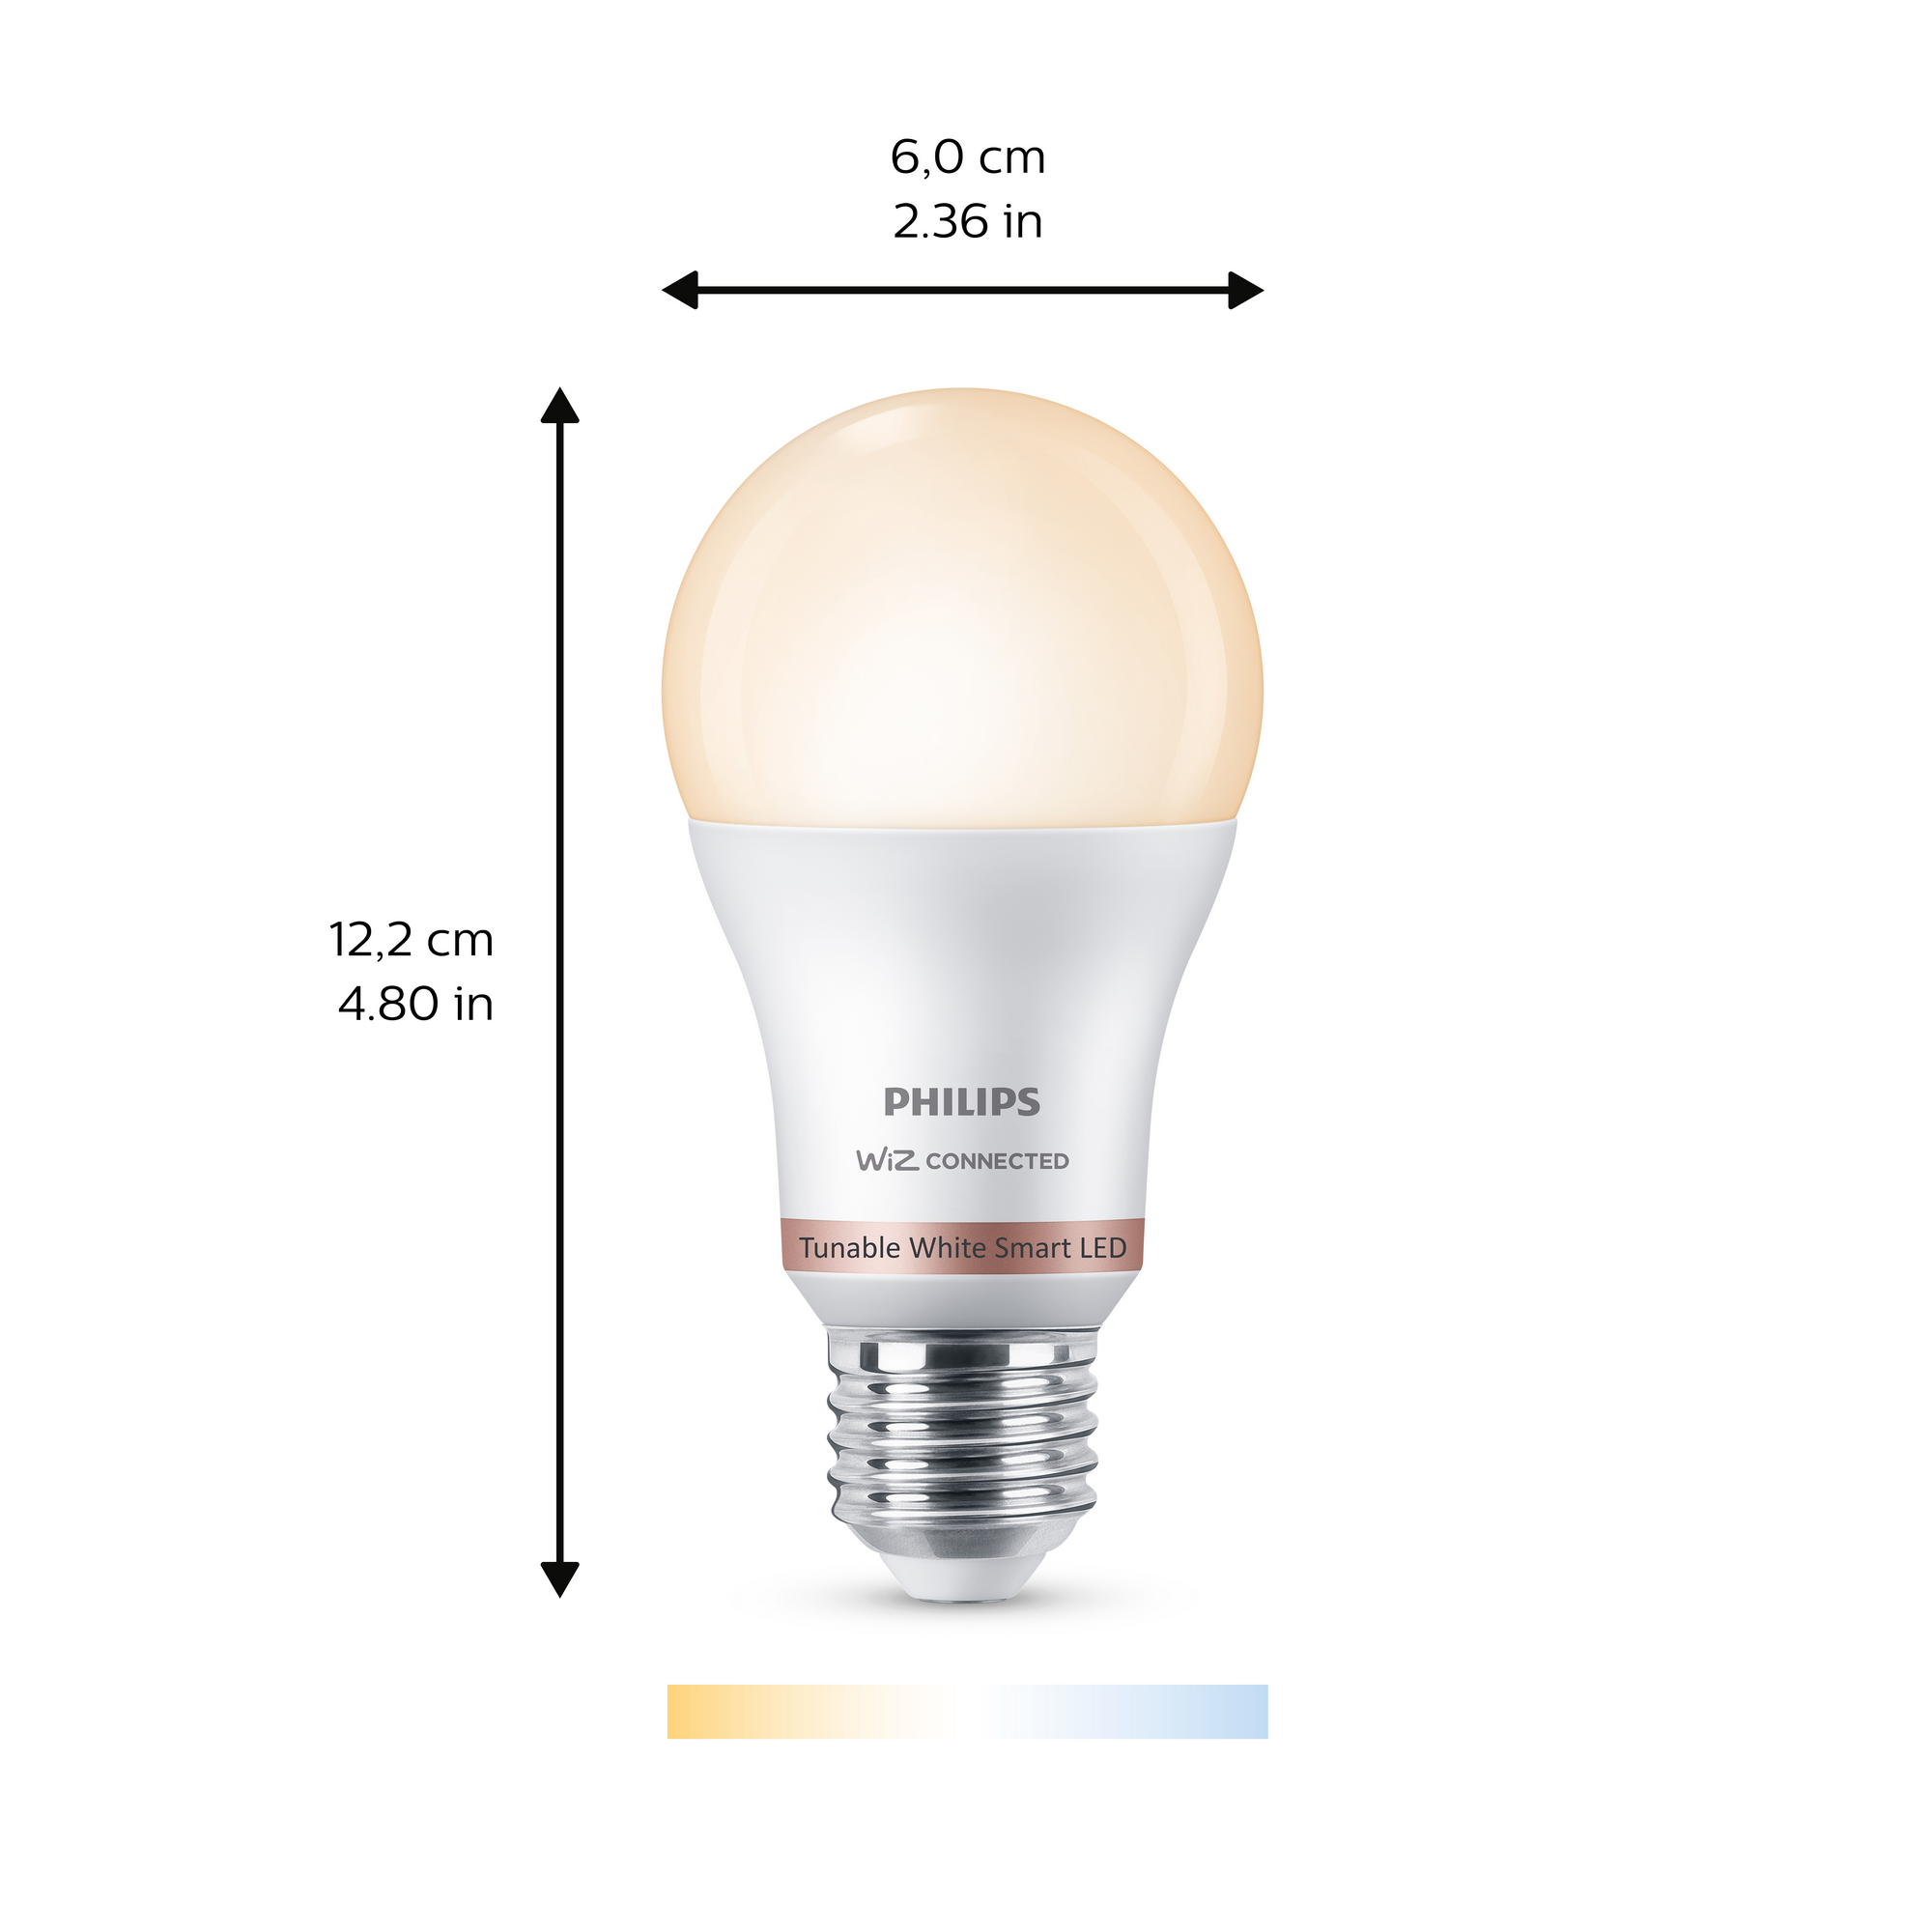 LED-Lampe 'SmartLED' 806 lm E27 Glühlampe weiß 2700-6500 K 8 W + product picture